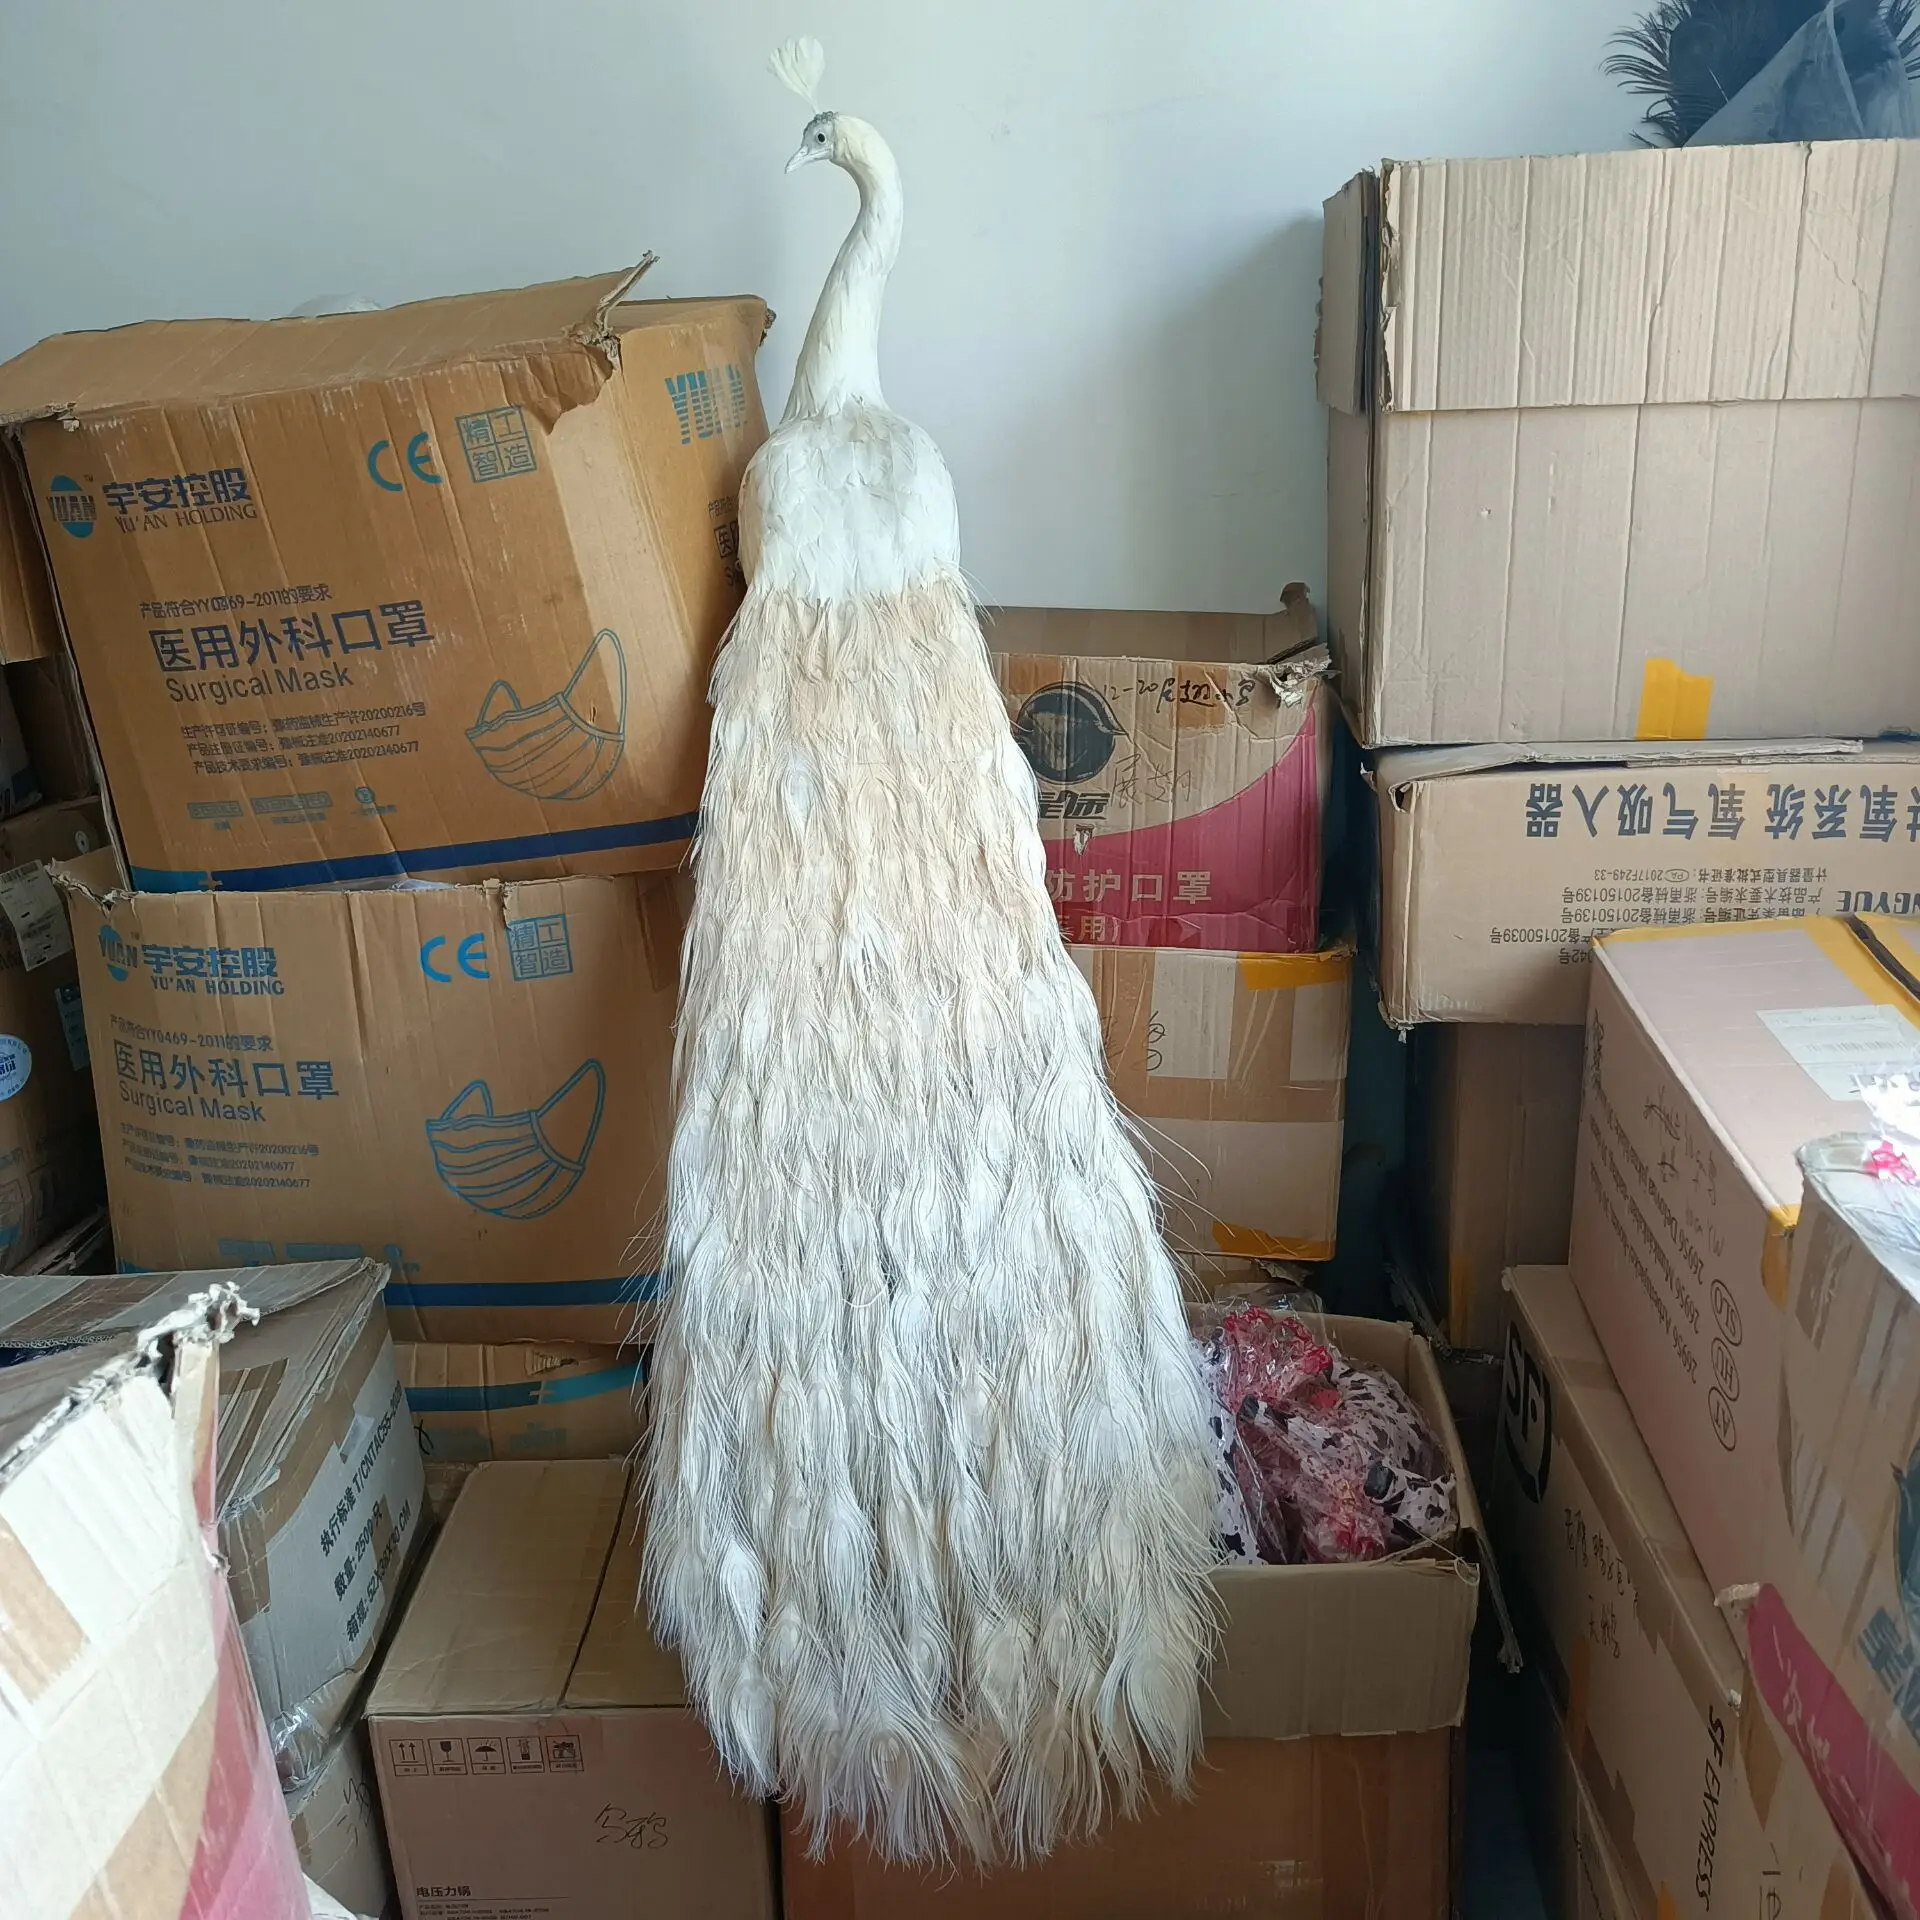 

long tail simulation foam&feathers white peacock model garden decoration gift about 150cm s2710